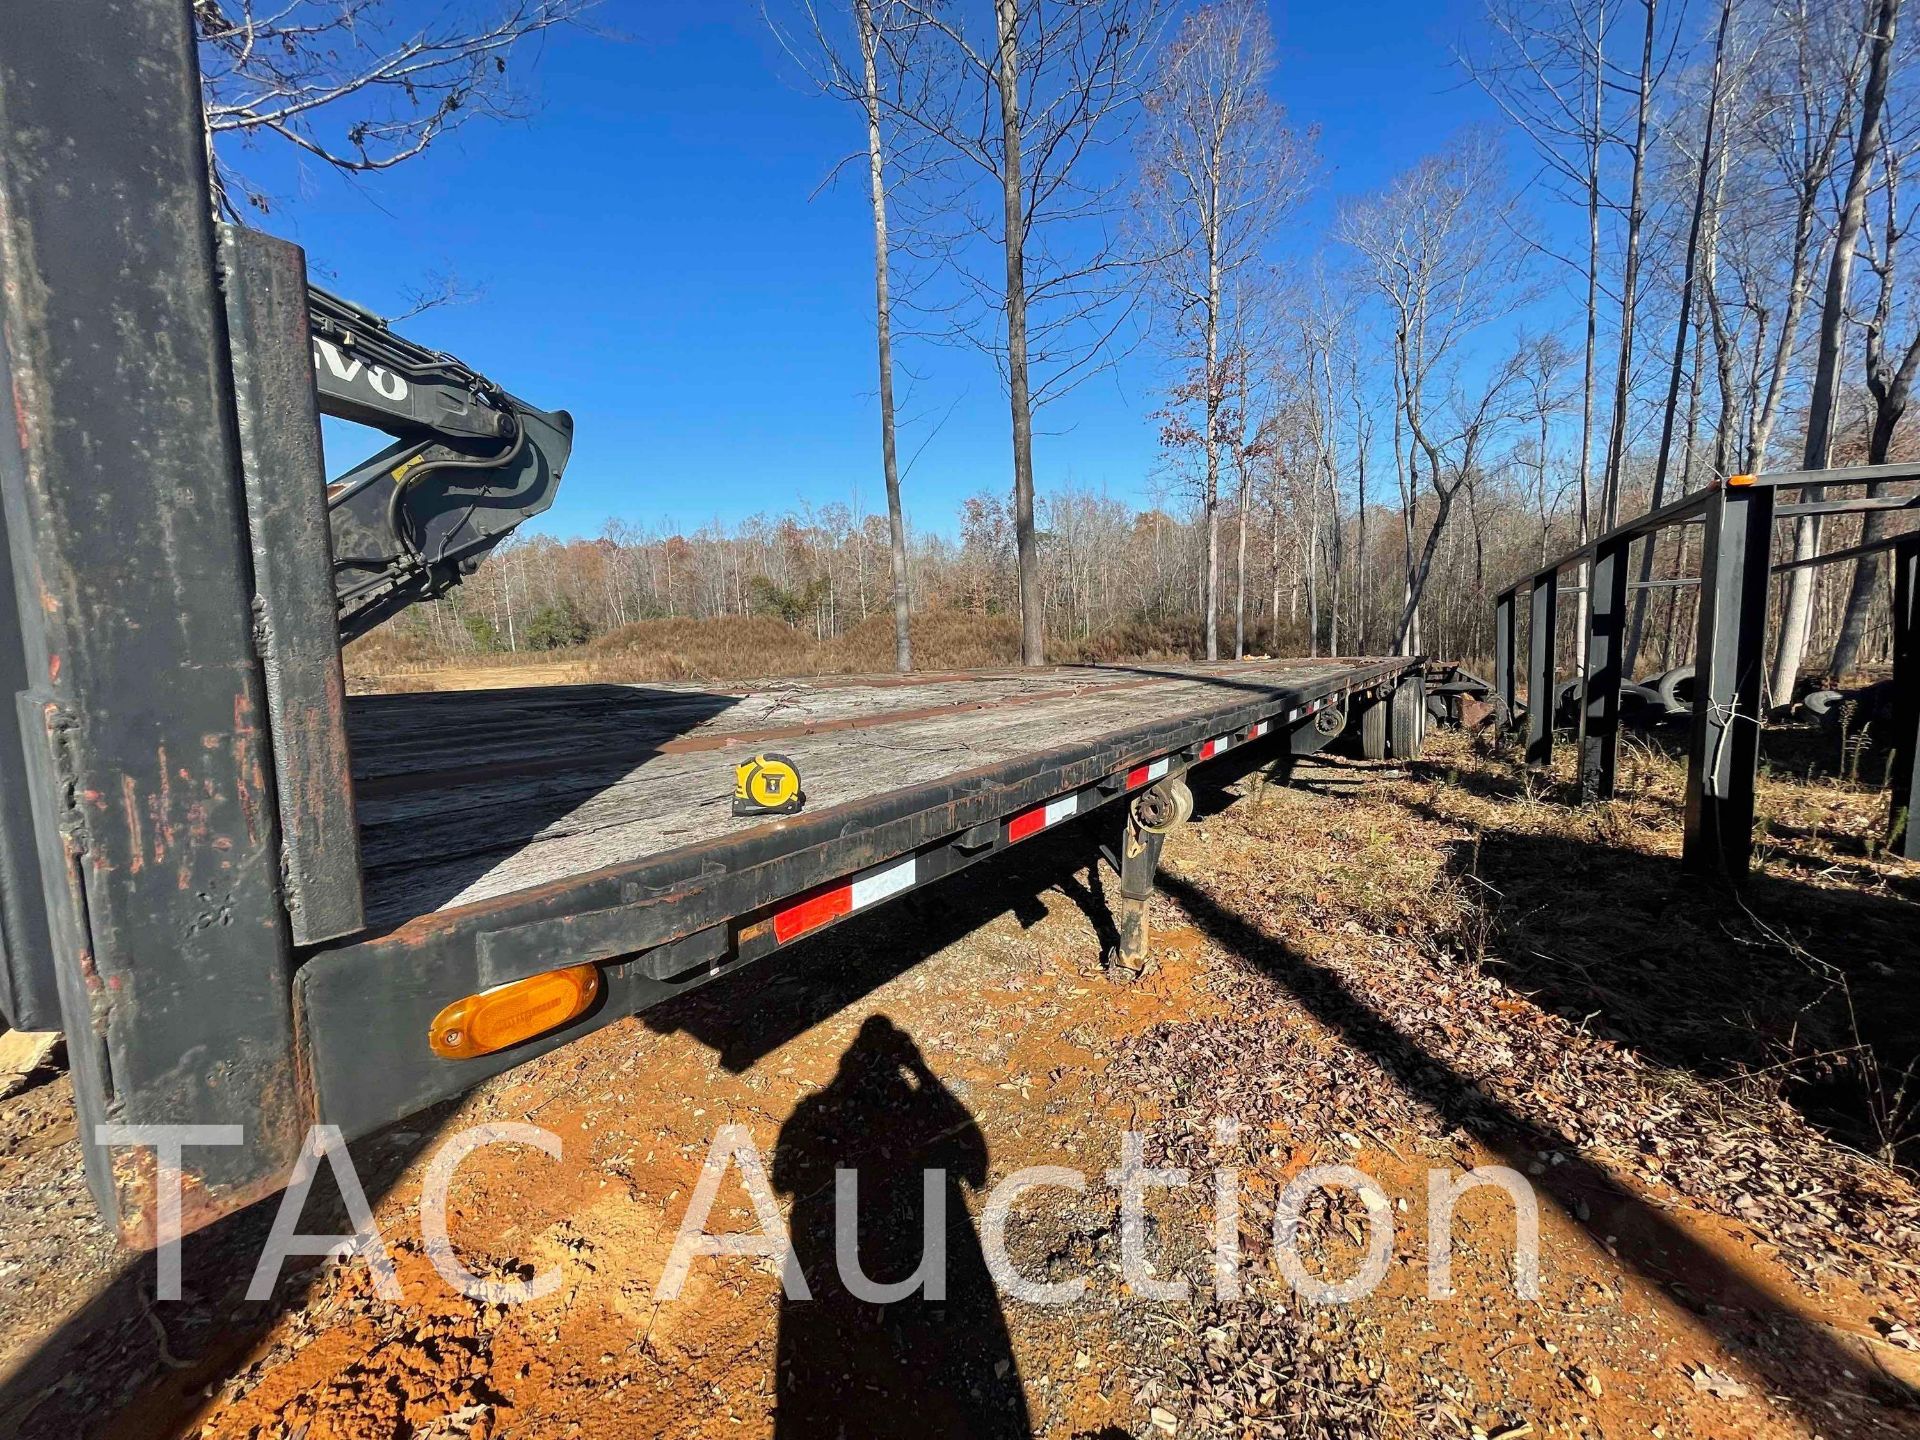 1986 Utility 45ft Flatbed Trailer - Image 12 of 26